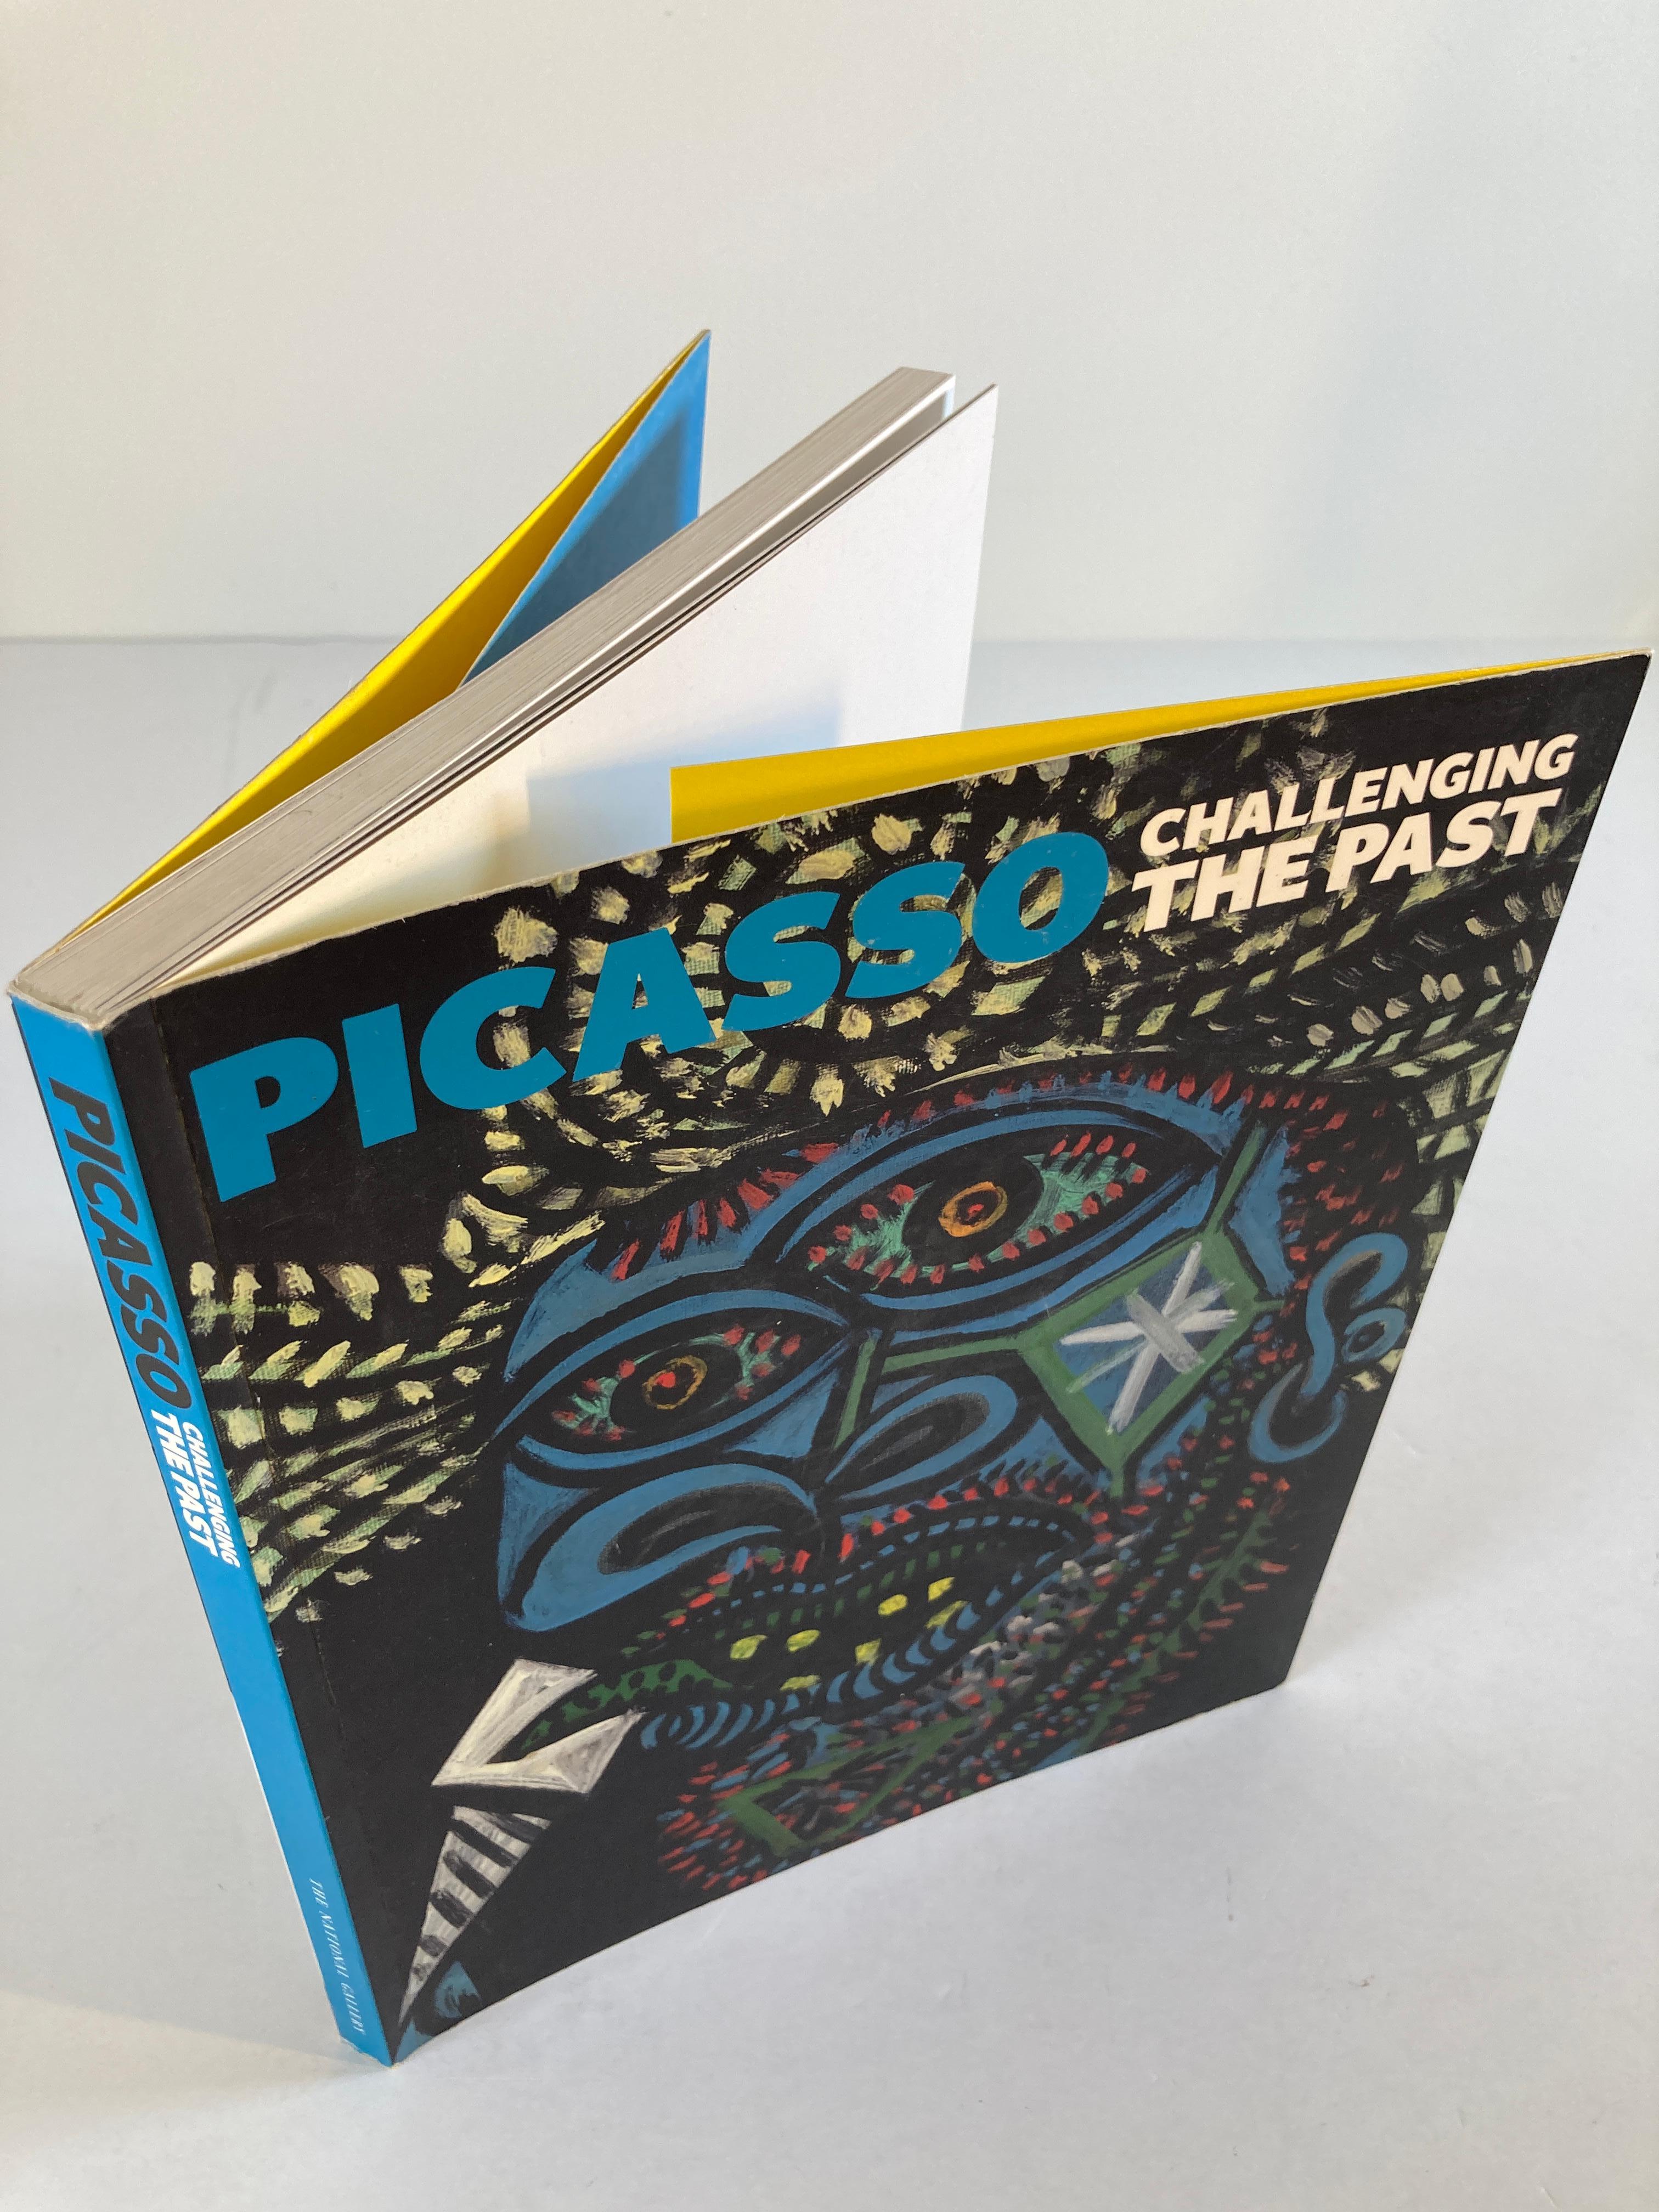 Picasso Challenging the Past Book by Elizabeth Cowling and Pablo Picasso In Good Condition For Sale In North Hollywood, CA